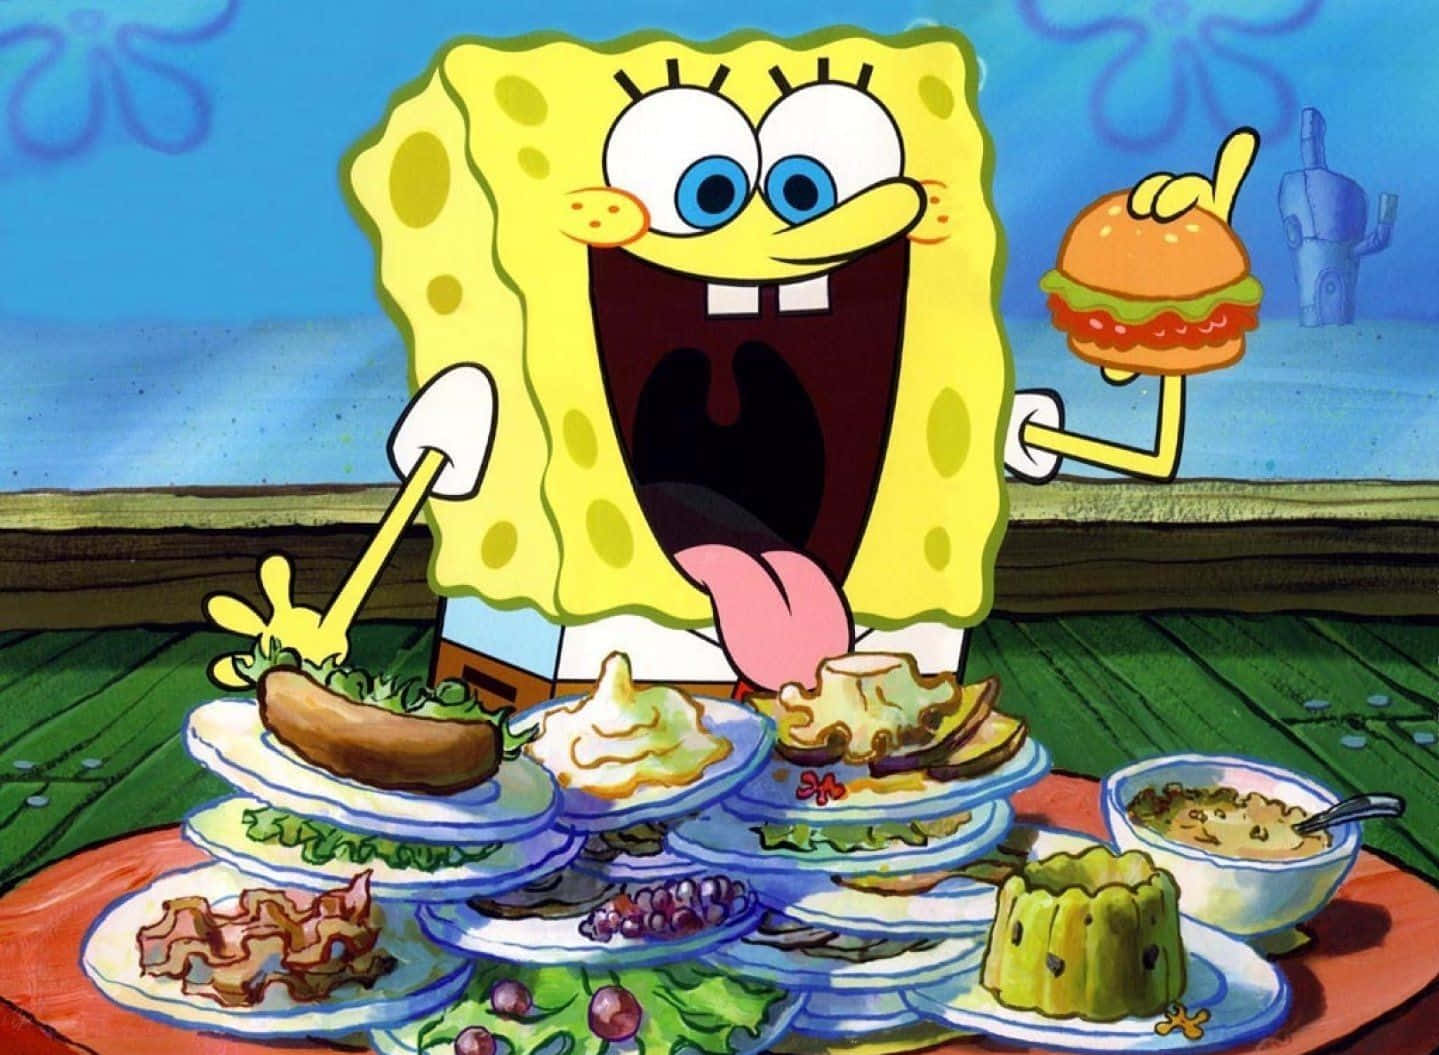 Delicious Krabby Patty on display at The Krusty Krab Wallpaper